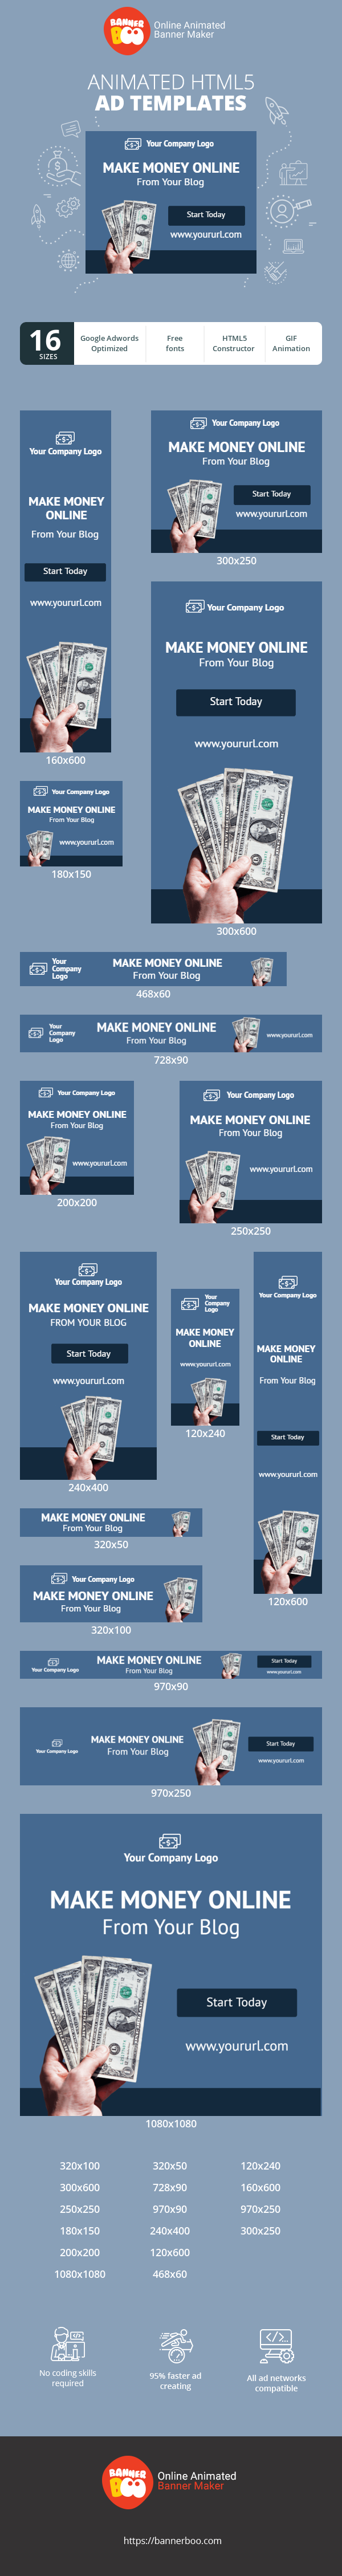 Banner ad template — Make Money Online — From Your Blog